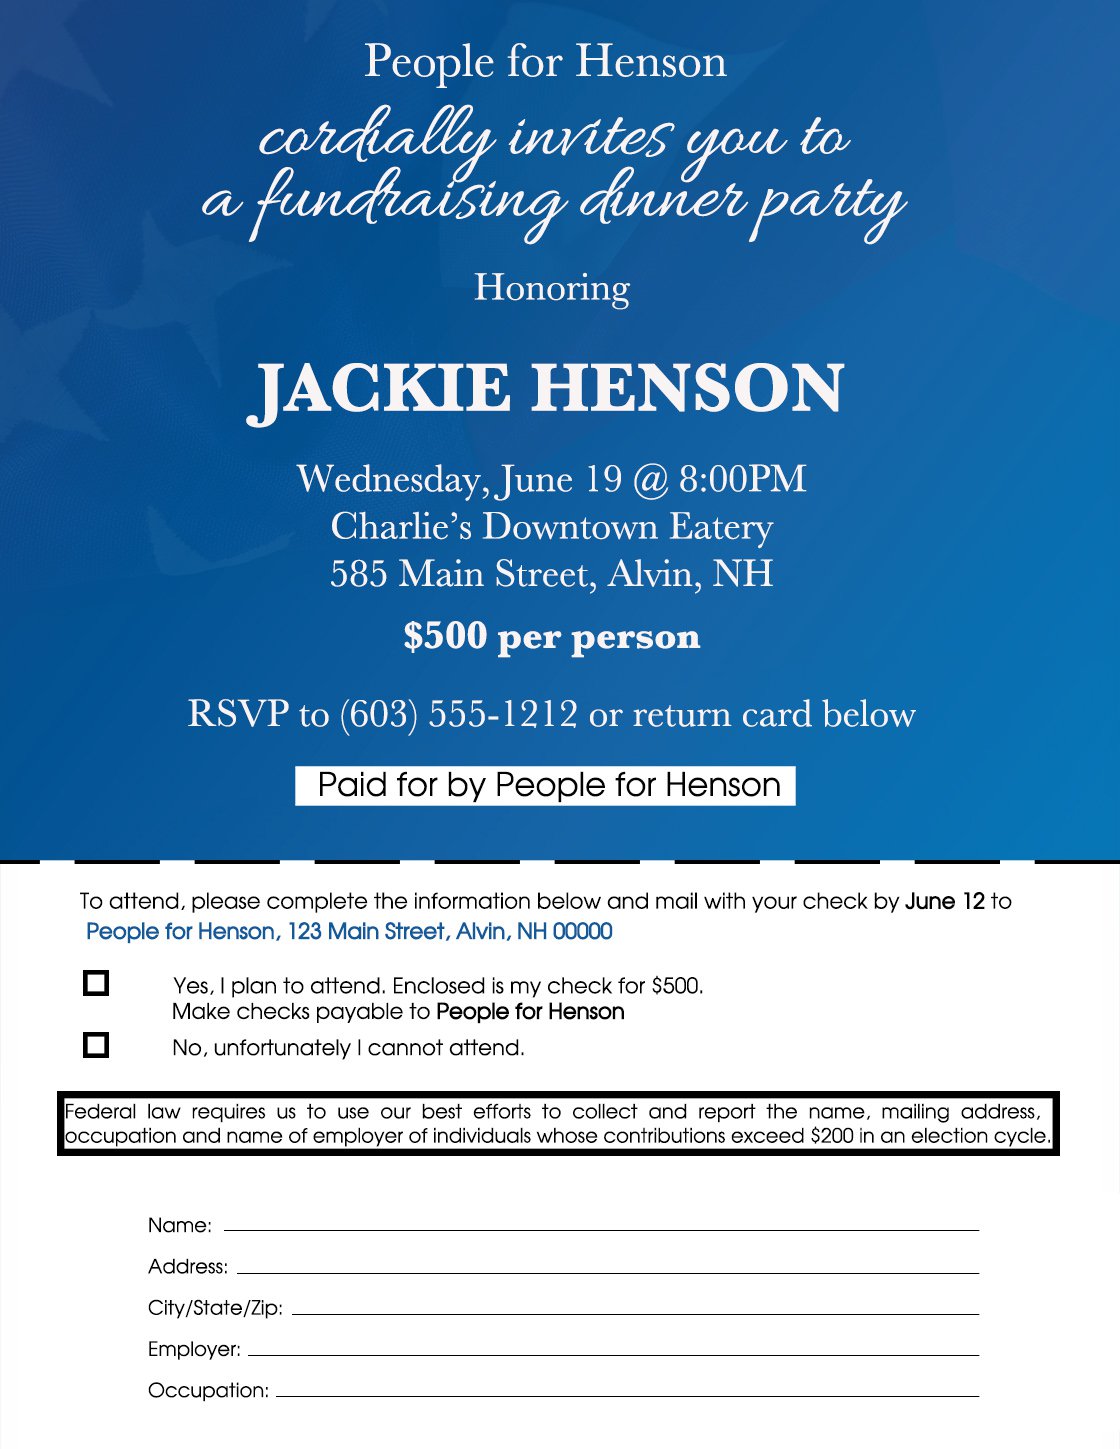 candidate-committee-fundraiser-invitation-example